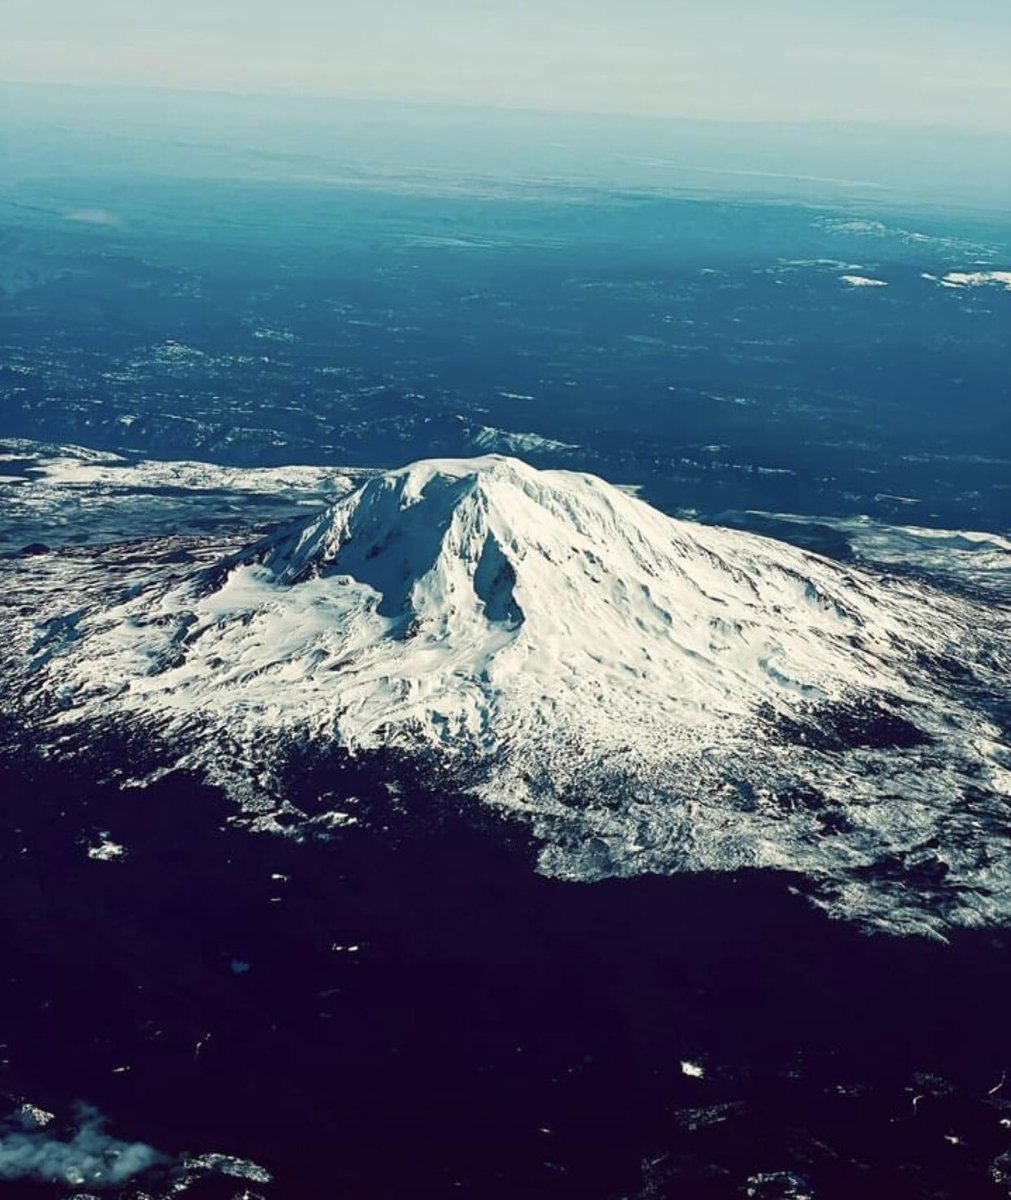 A friend of mine was flying home to Washington state this morning and sent me this aerial view of Mount St. Helens🏔 when she landed. Still magnificently beautiful (even though it’s, technically, a crater now, post-1980 eruption 🌋). #nature #volcaniceruption